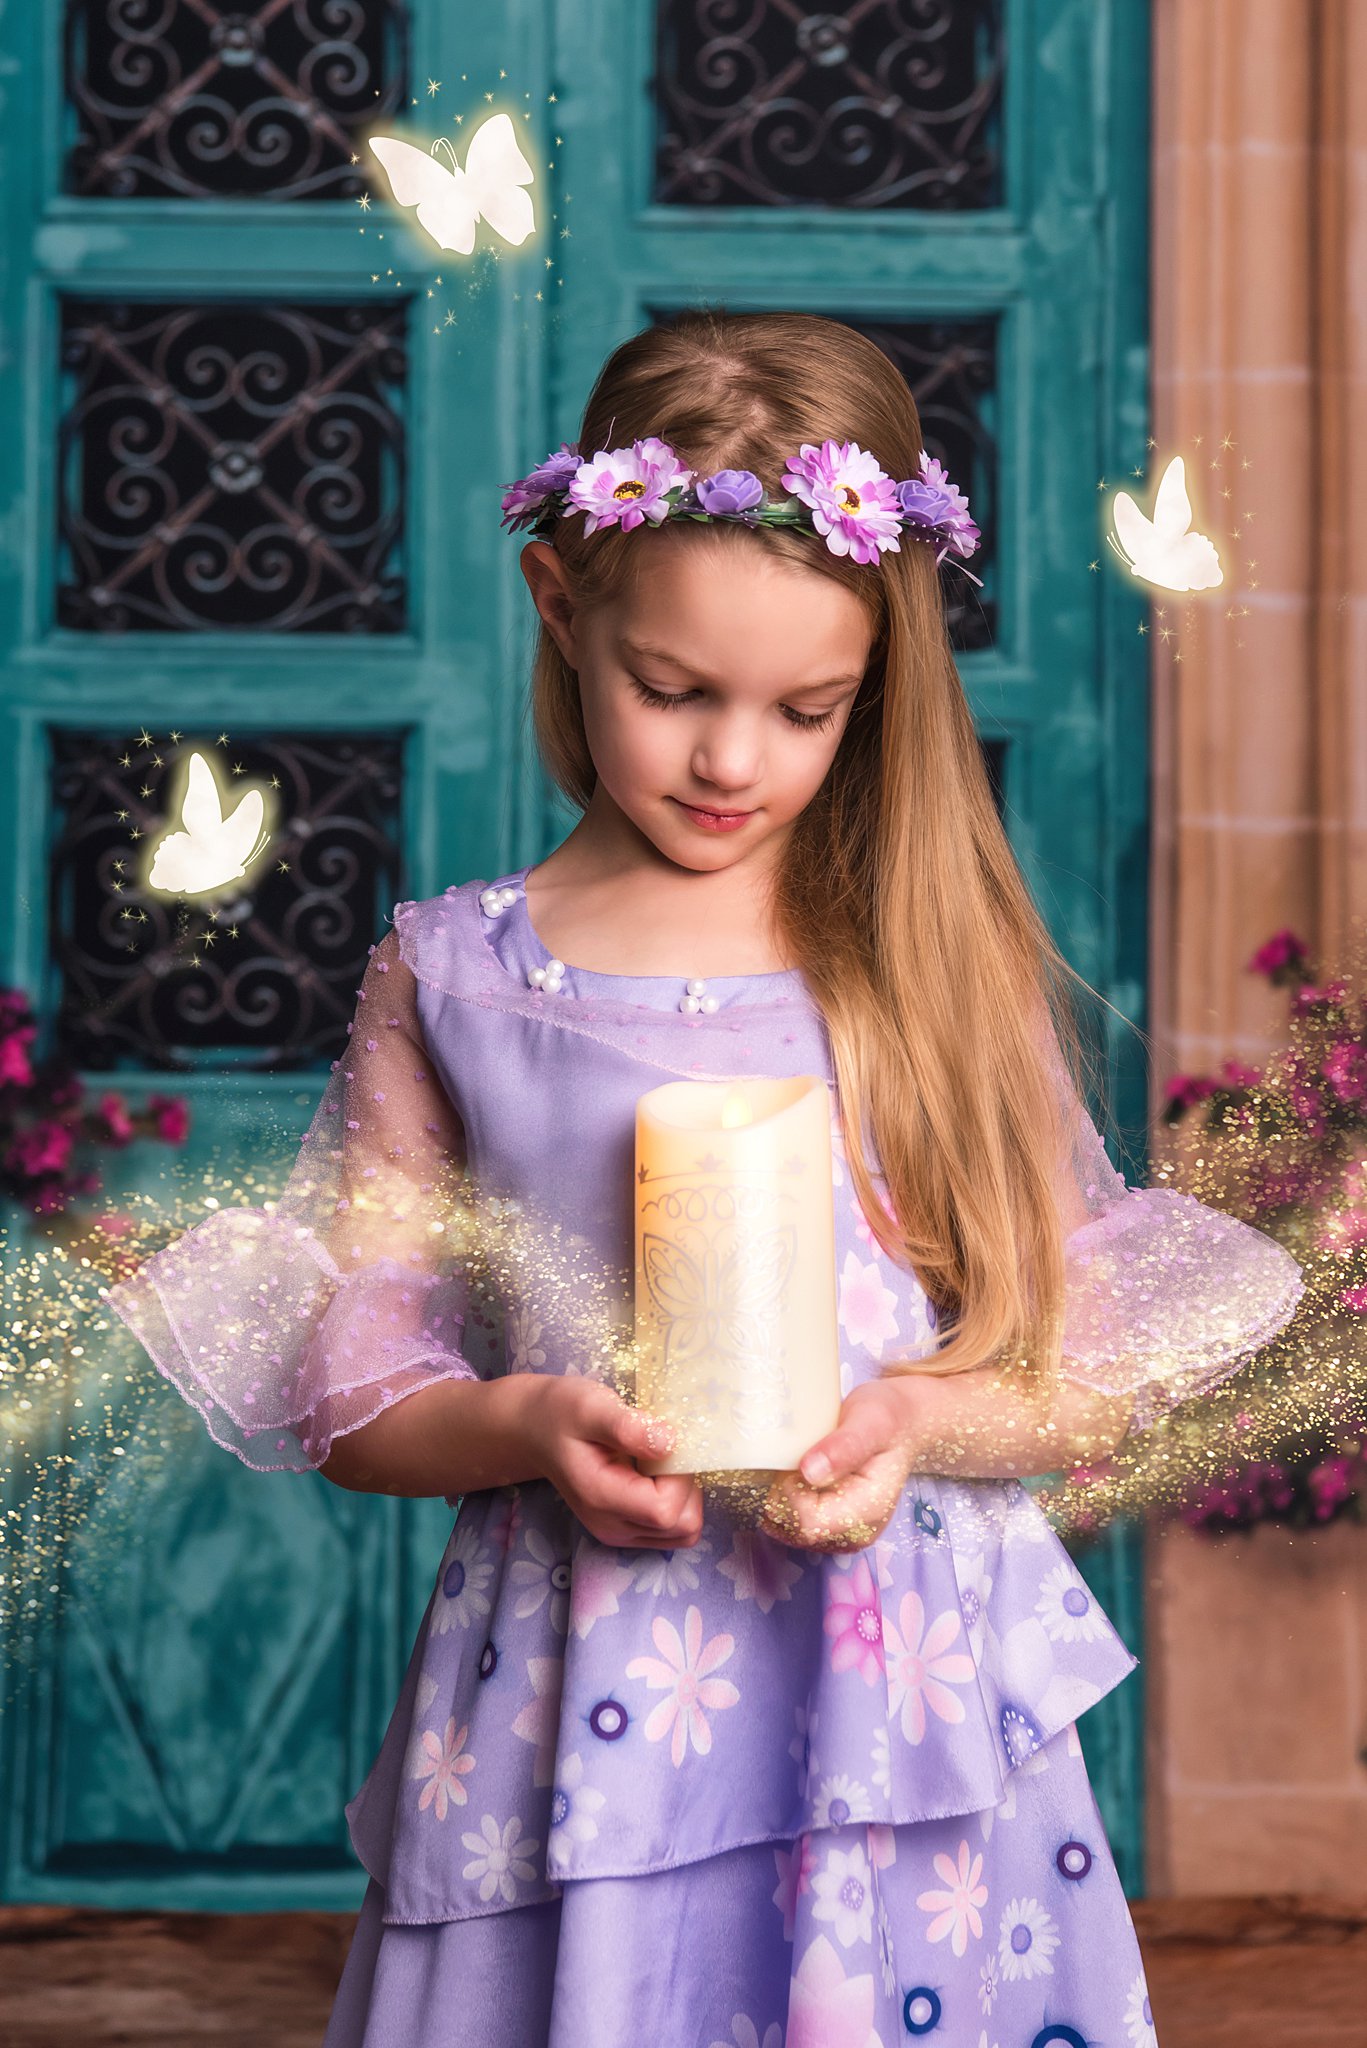 A young girl in a princess dress holds a candle while light butterflies flutter around her indoor playground waco tx